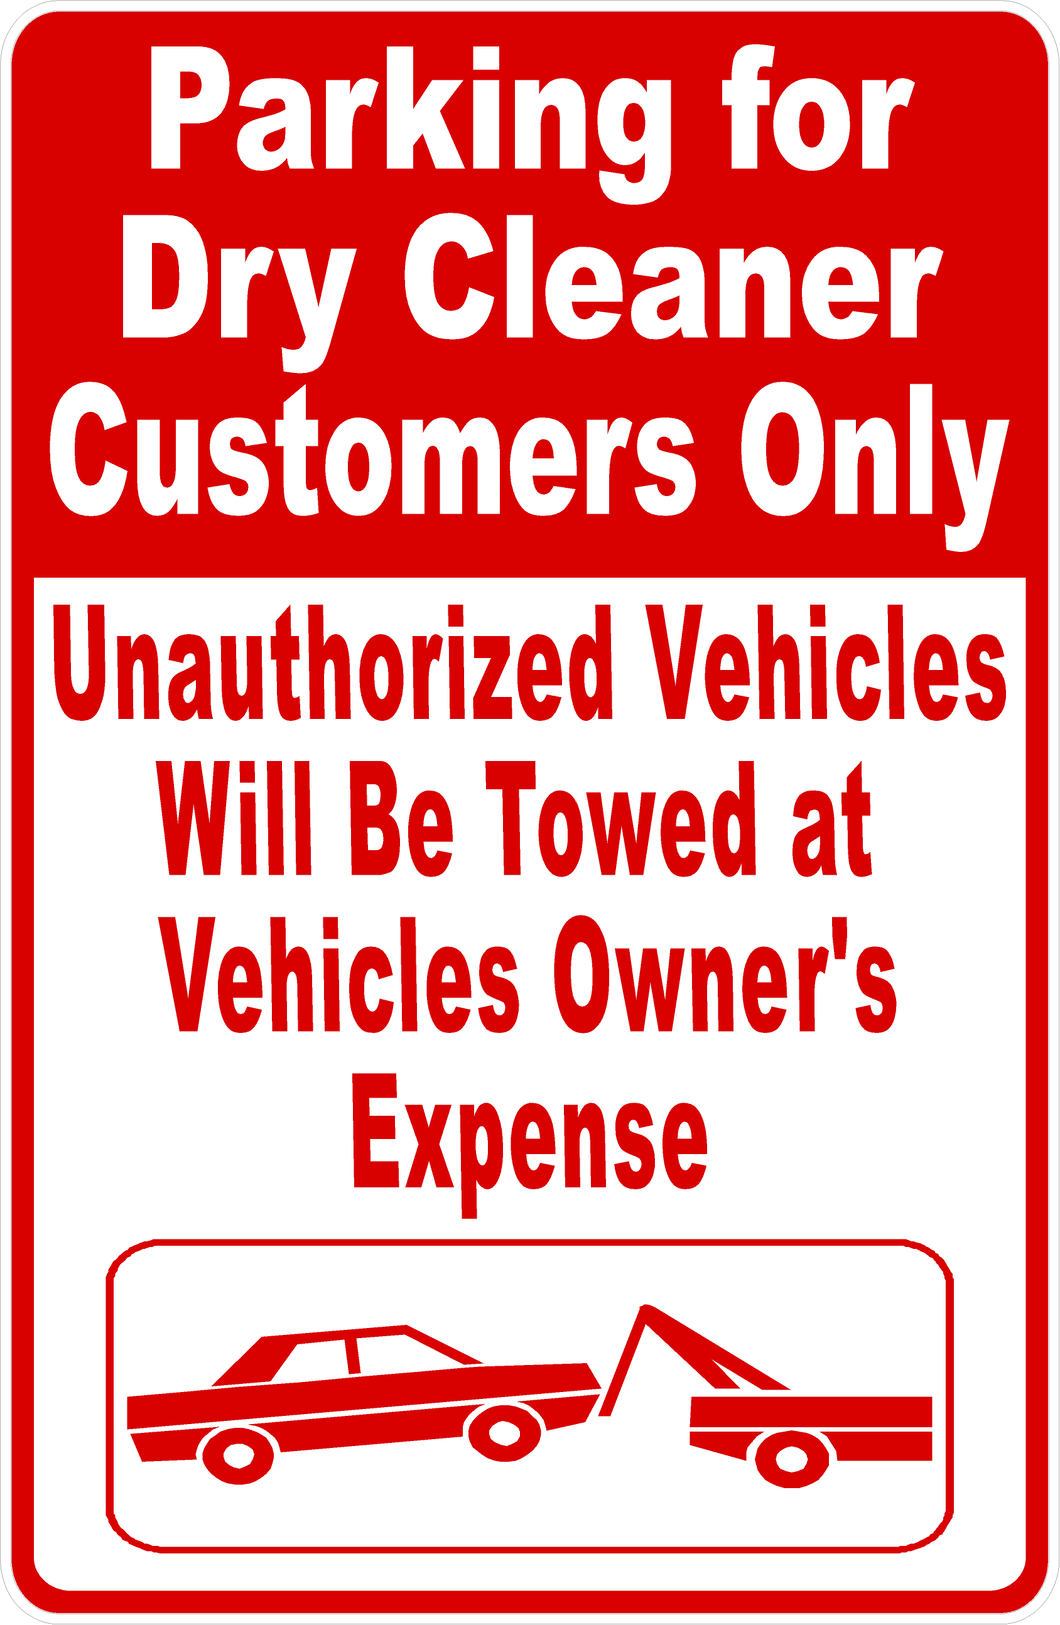 Dry Cleaner Customer Parking Sign